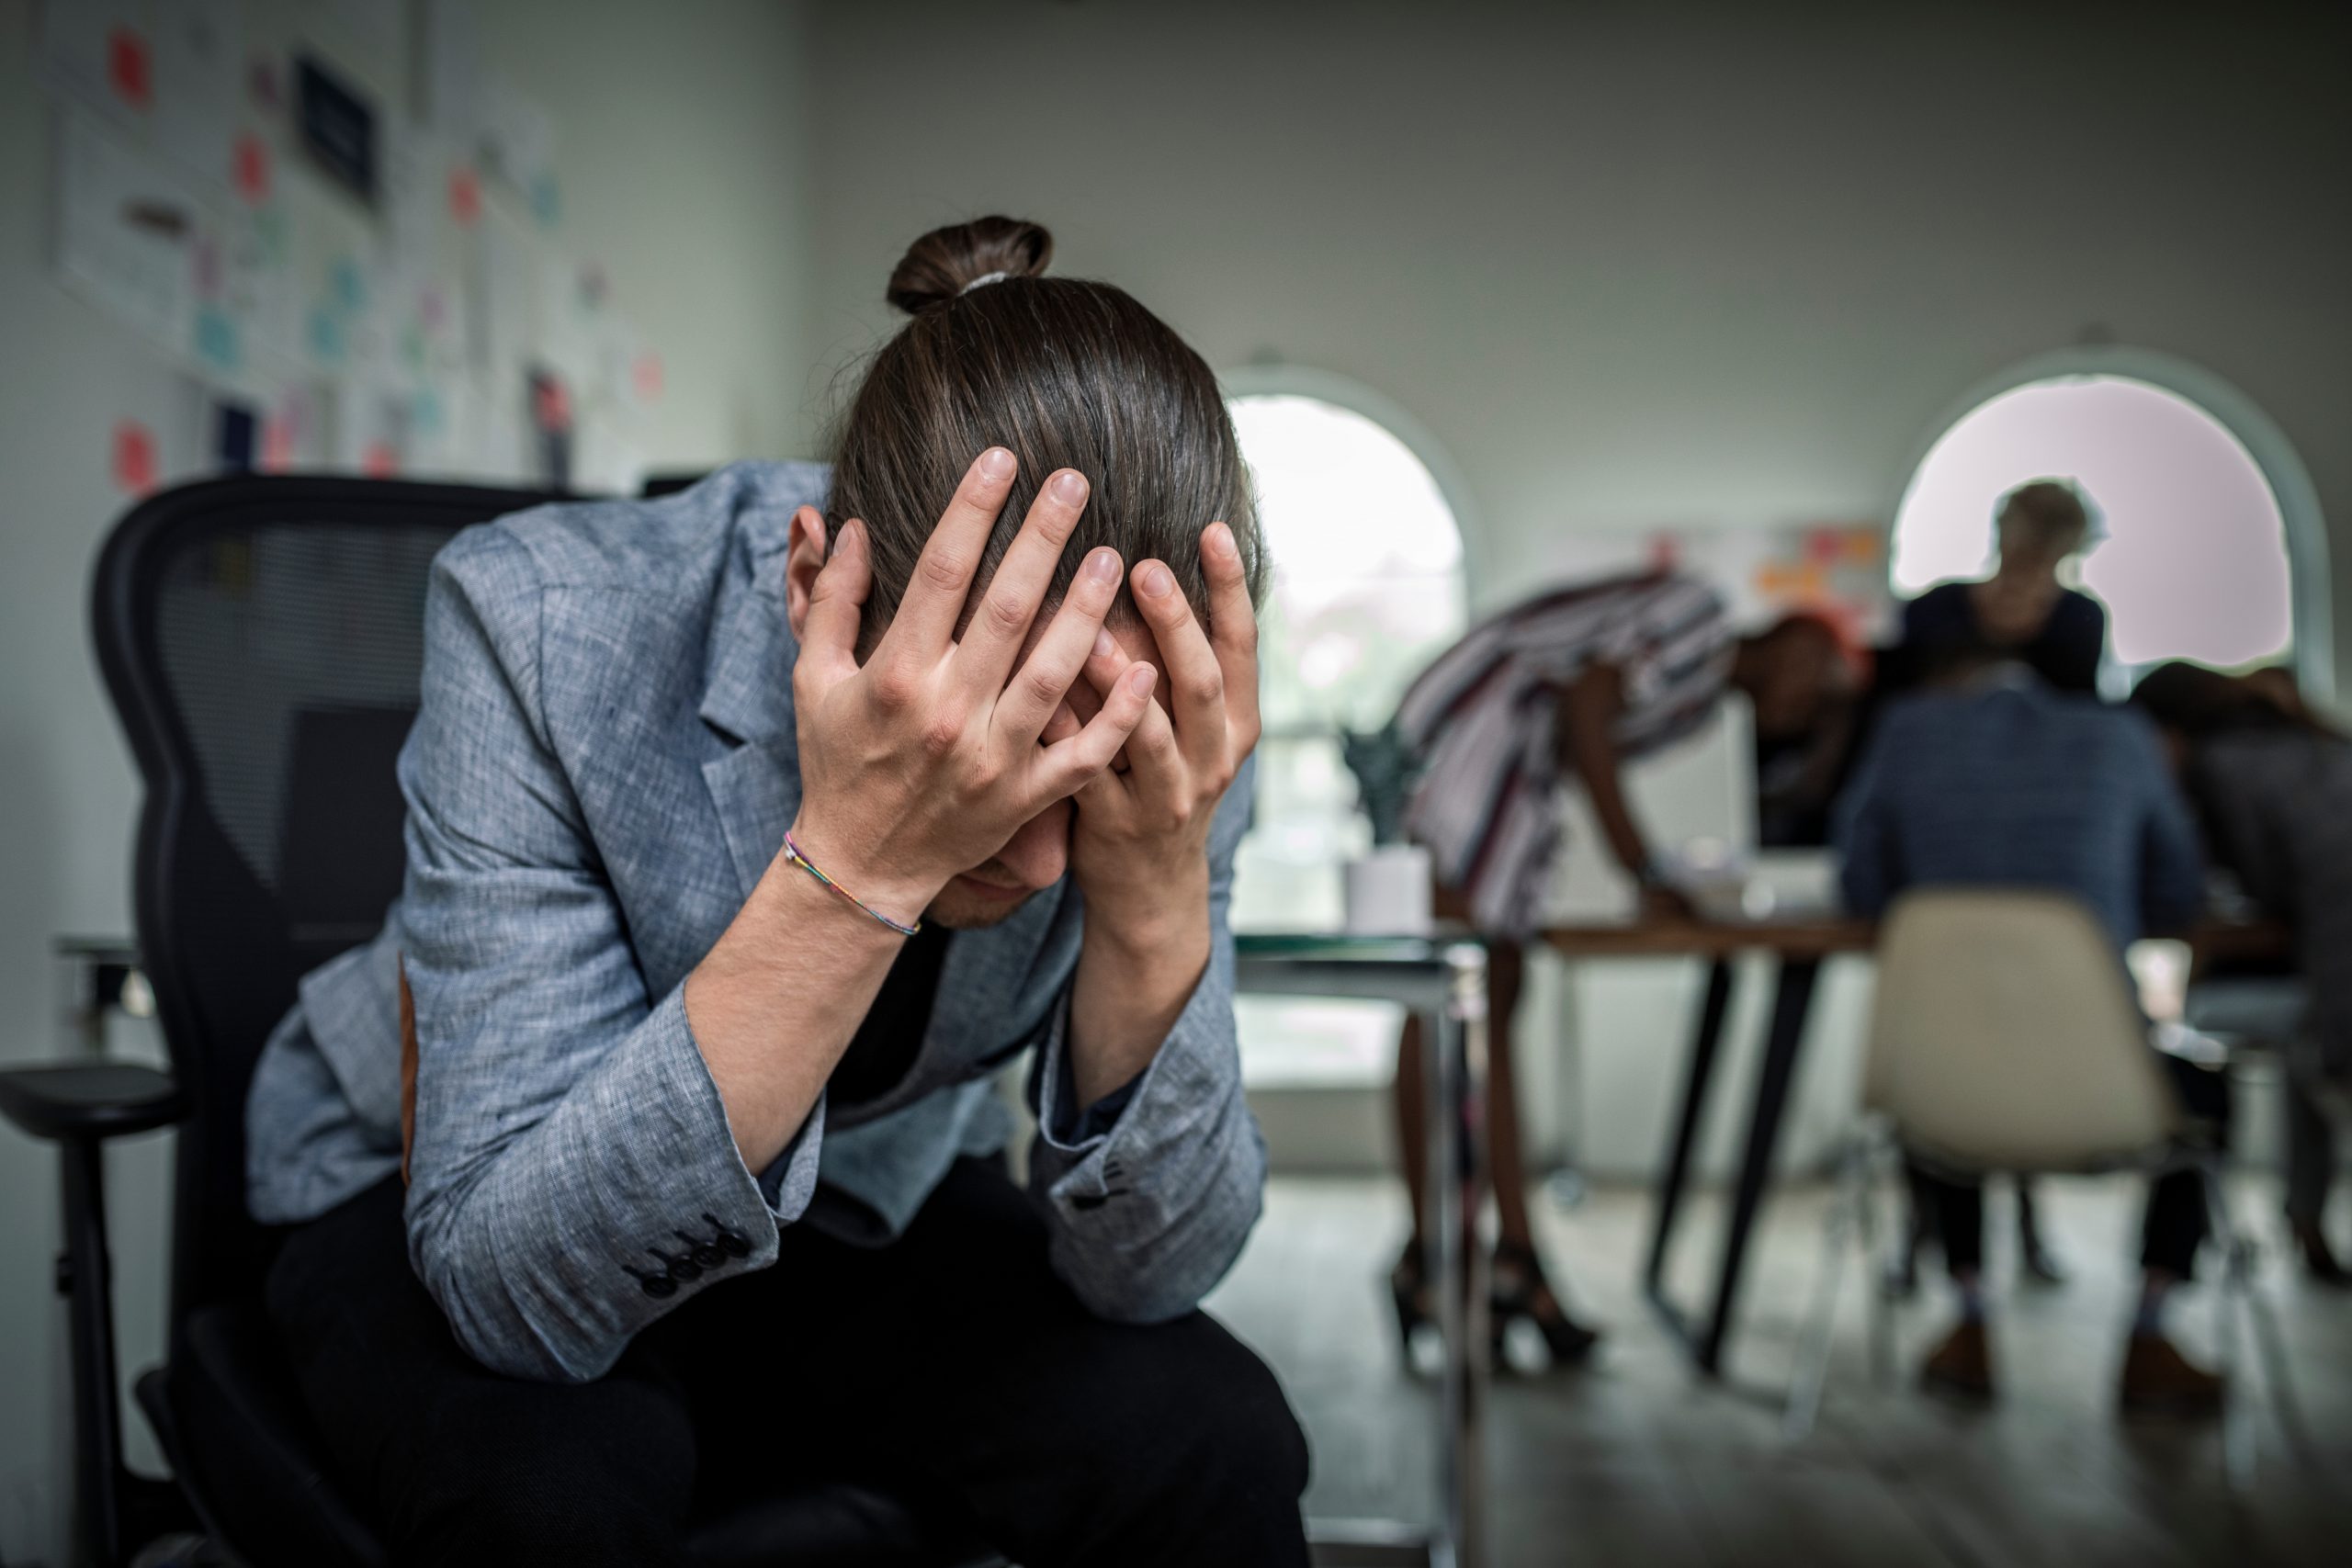 Coping with anxiety in the workplace